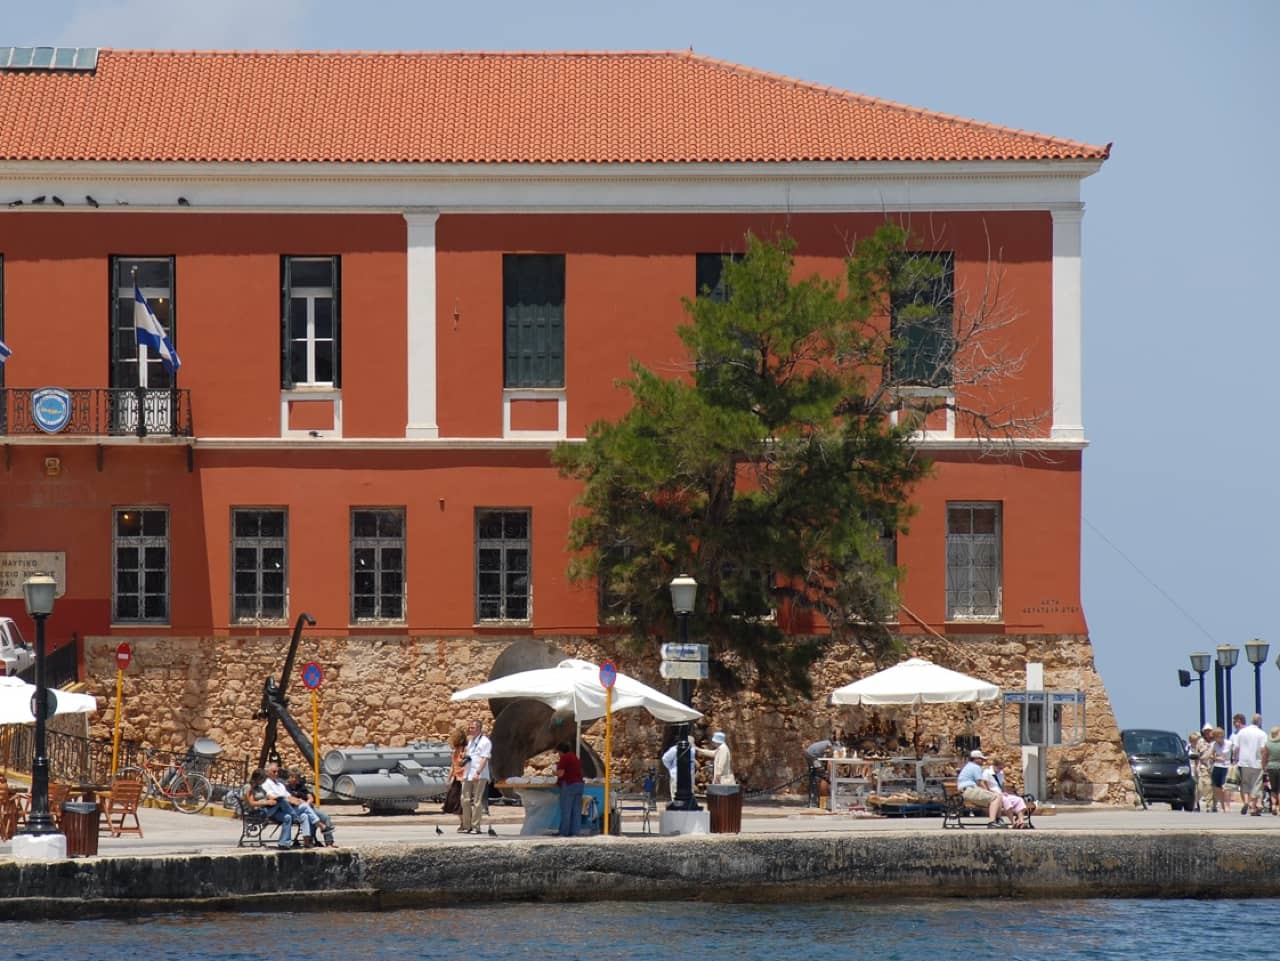 chania travel guide, chania city, hania town, chania things to do, chania hotels, chania where to stay, chania what to do, best sites chania town, chania history museums, chania gastronomy, chania travel tips